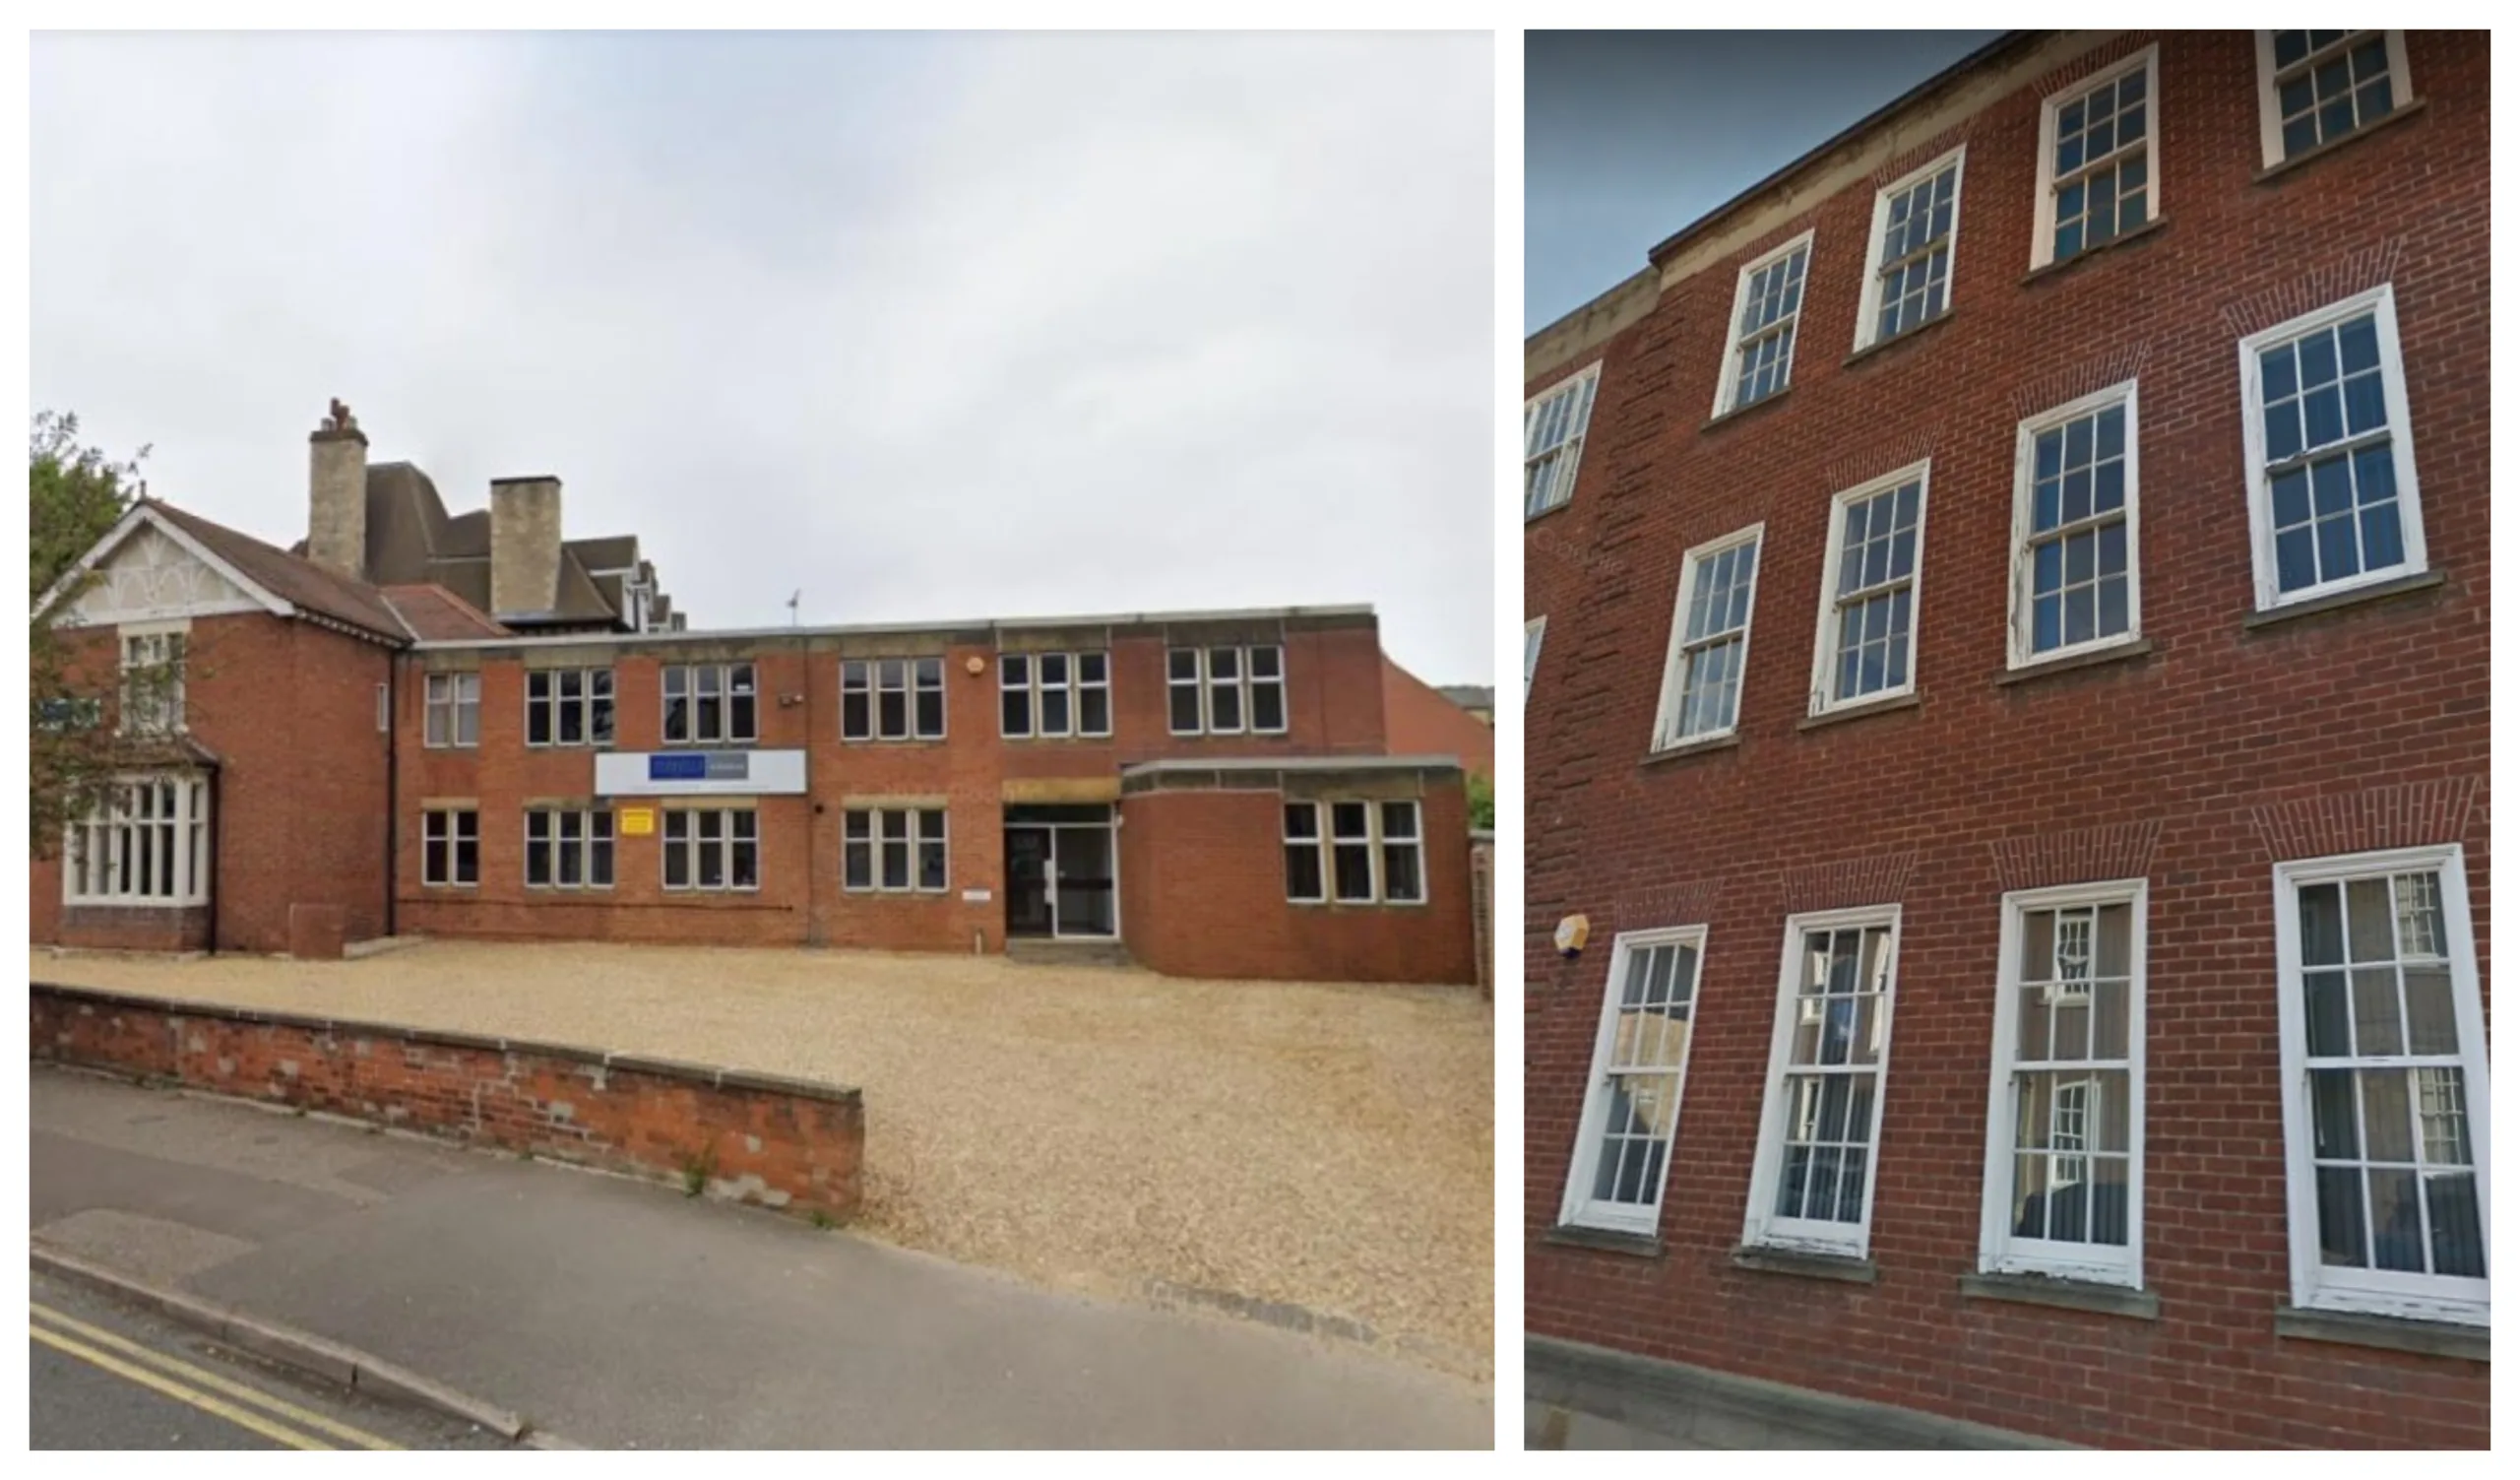 16 Lincoln Road (left) and 18 Priestgate – both in Peterborough and both offices – could be converted to housing. The city council will decide.